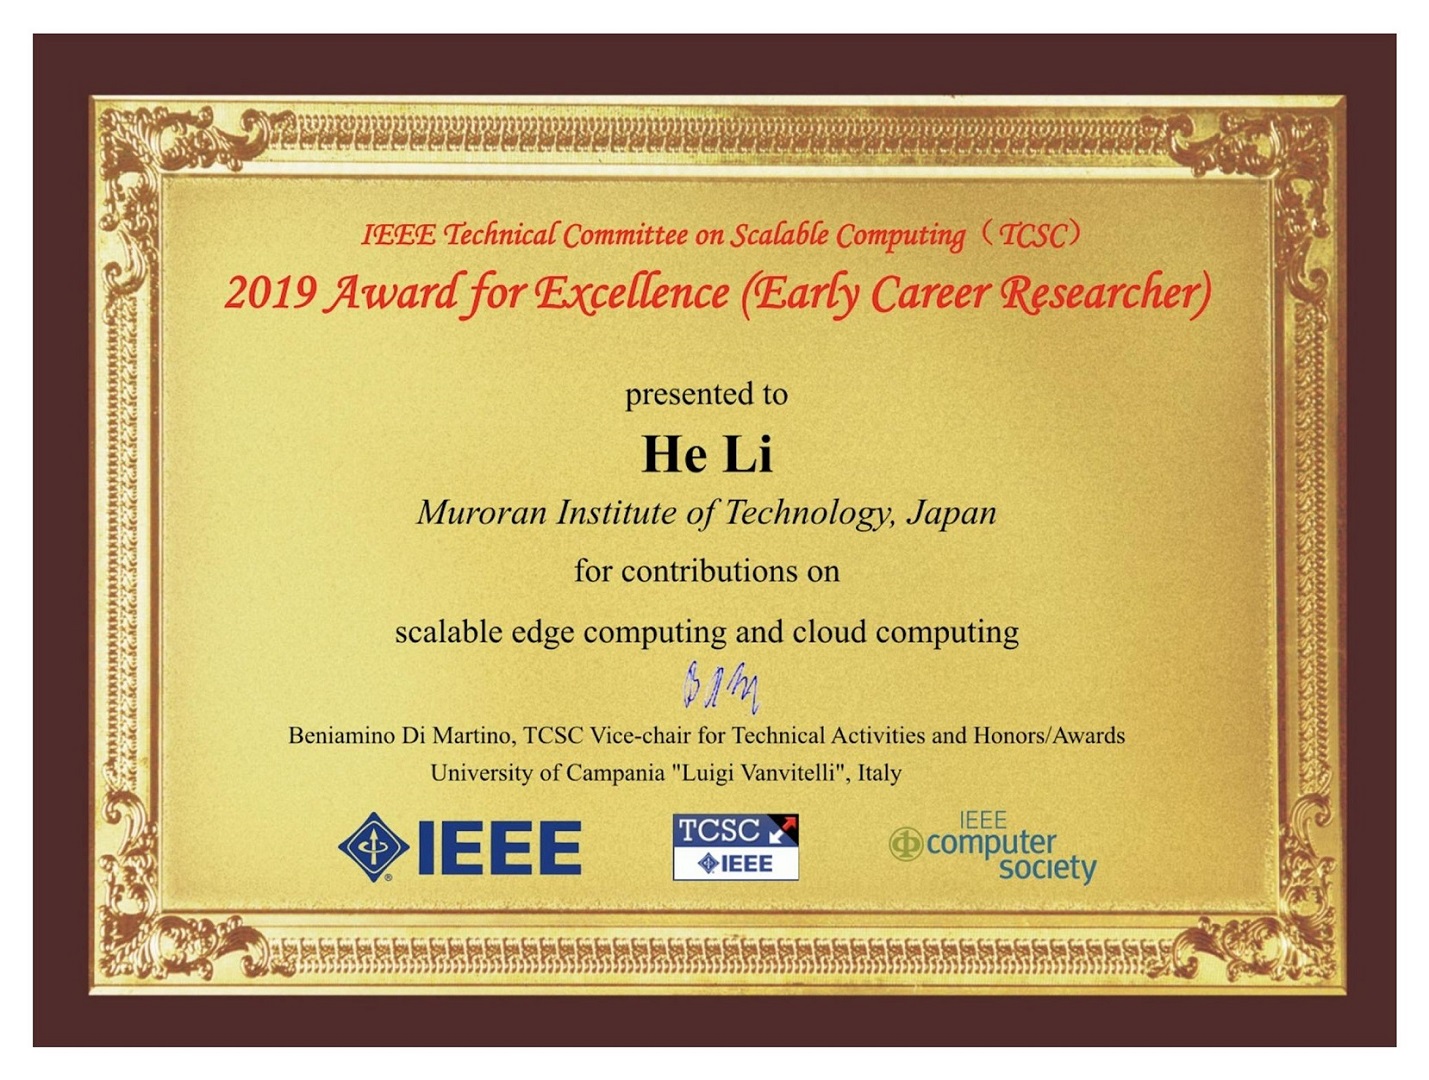 IEEE TCSC Award for Excellence (Early Career Researcher)